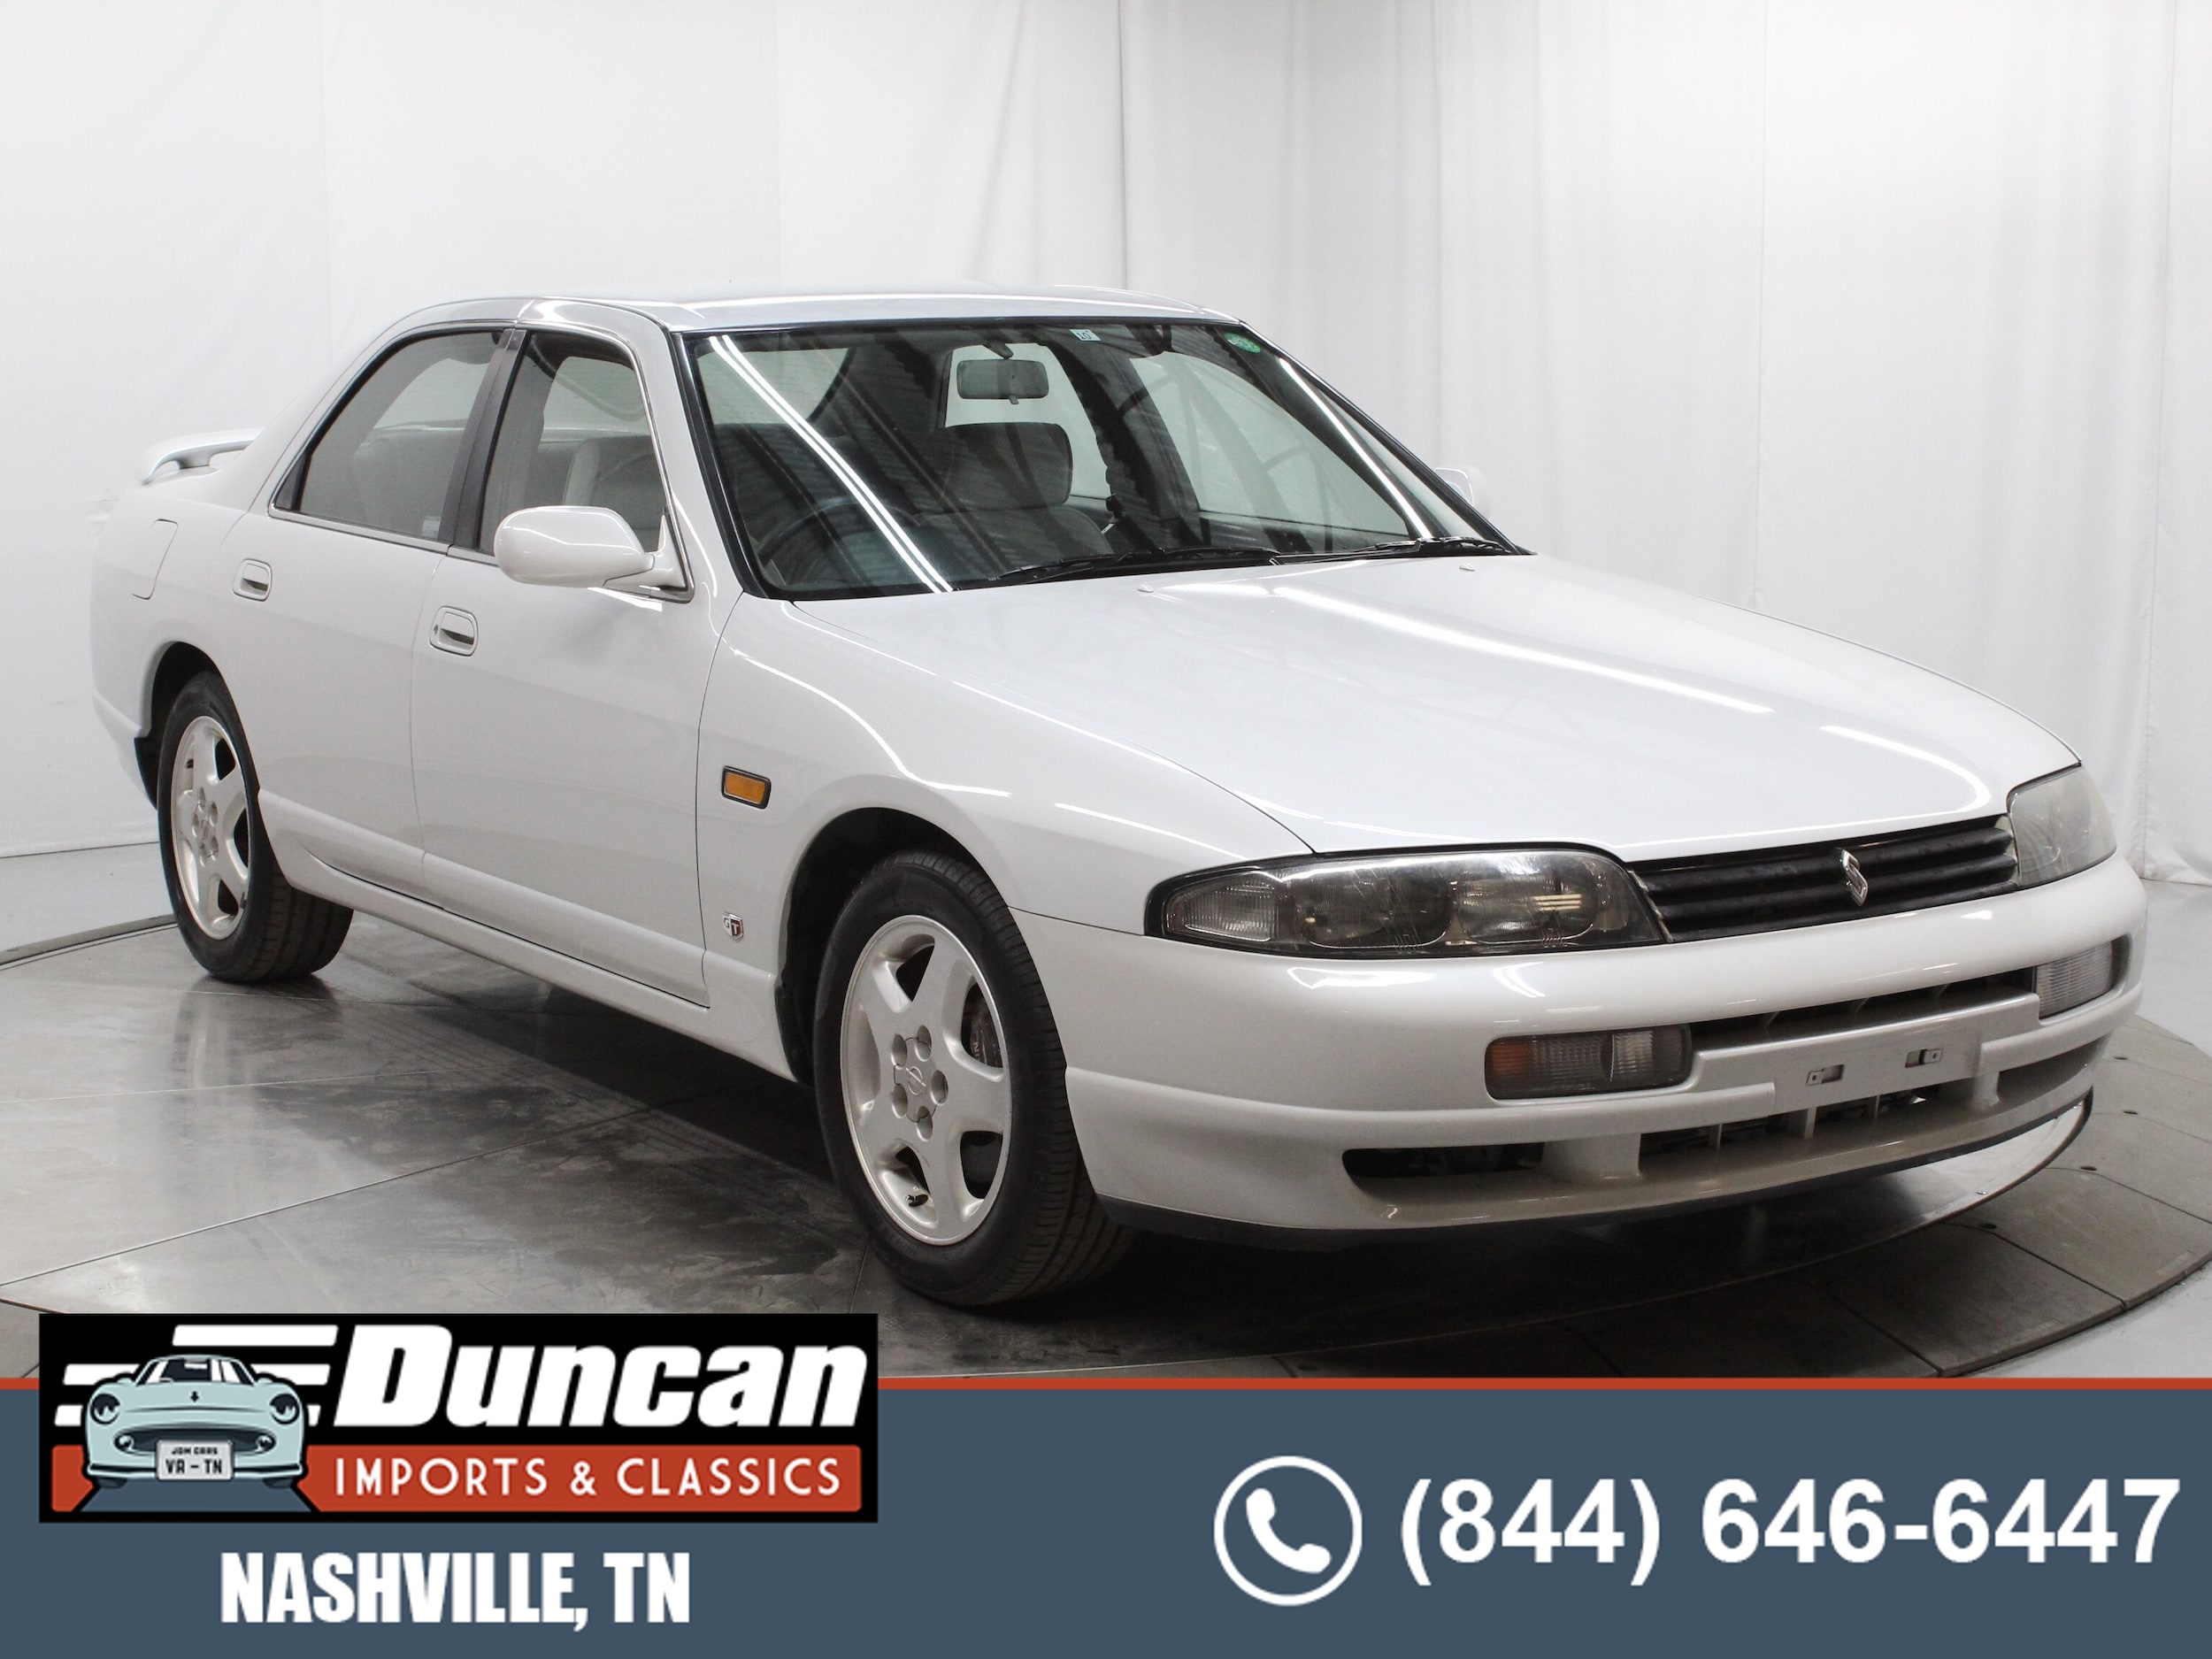 Used 1995 Nissan Skyline For Sale at Duncan Imports and Classic 